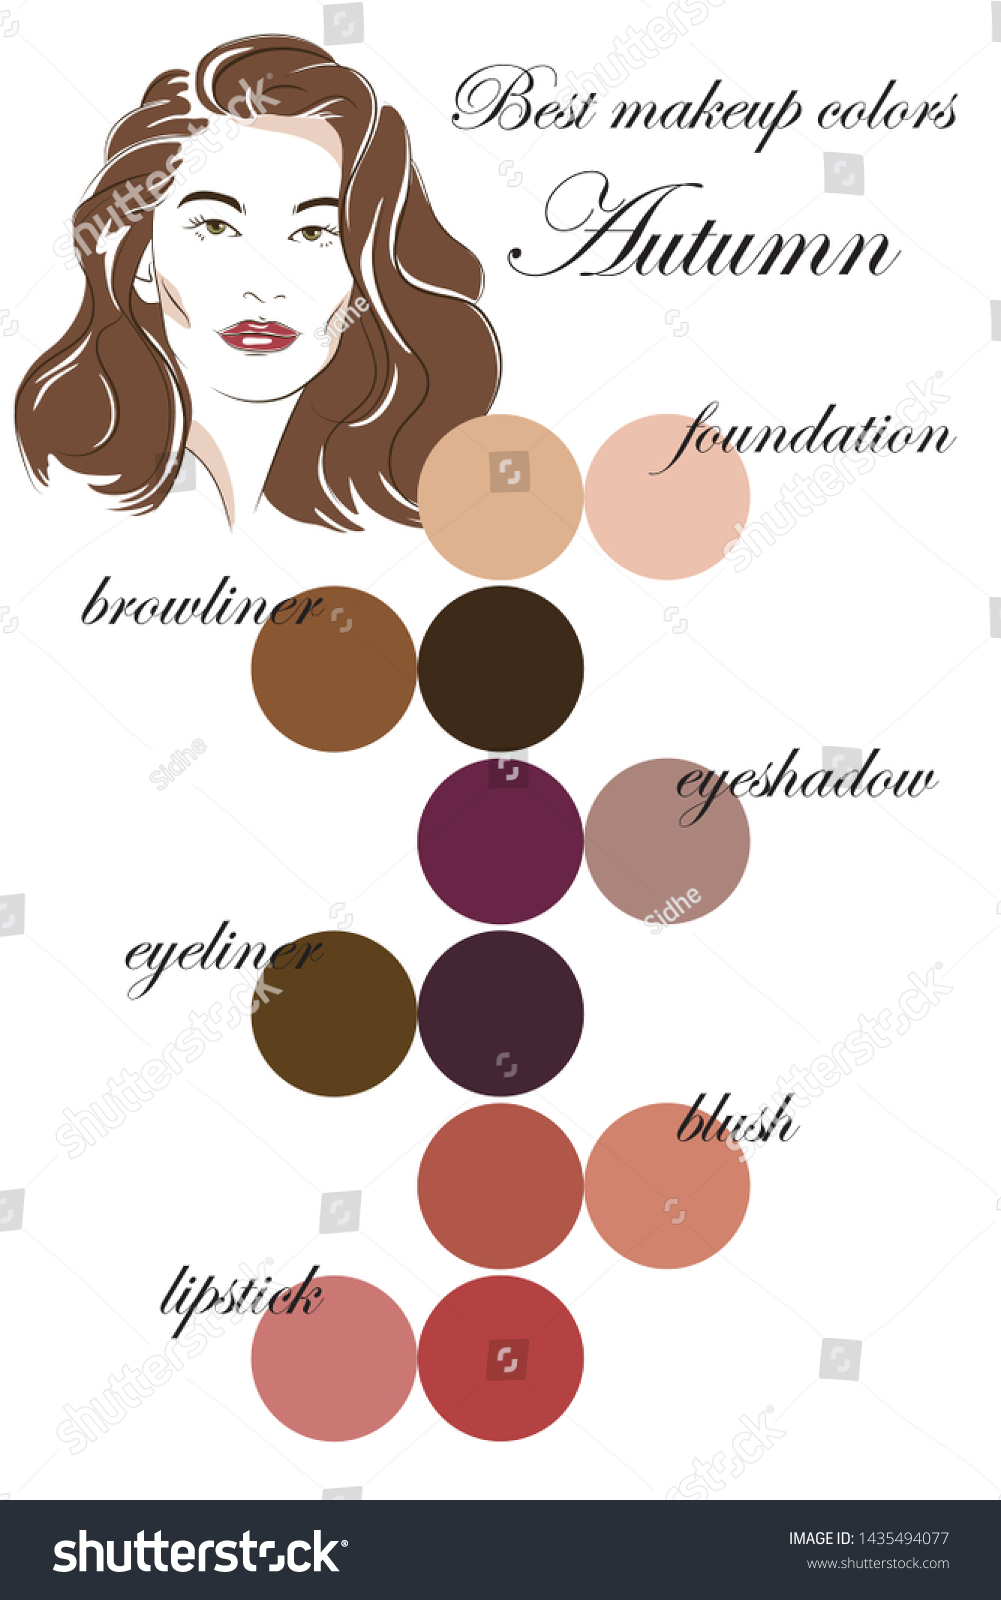 Best Makeup Colors Autumn Type Appearance Stock Vector (Royalty Free ...